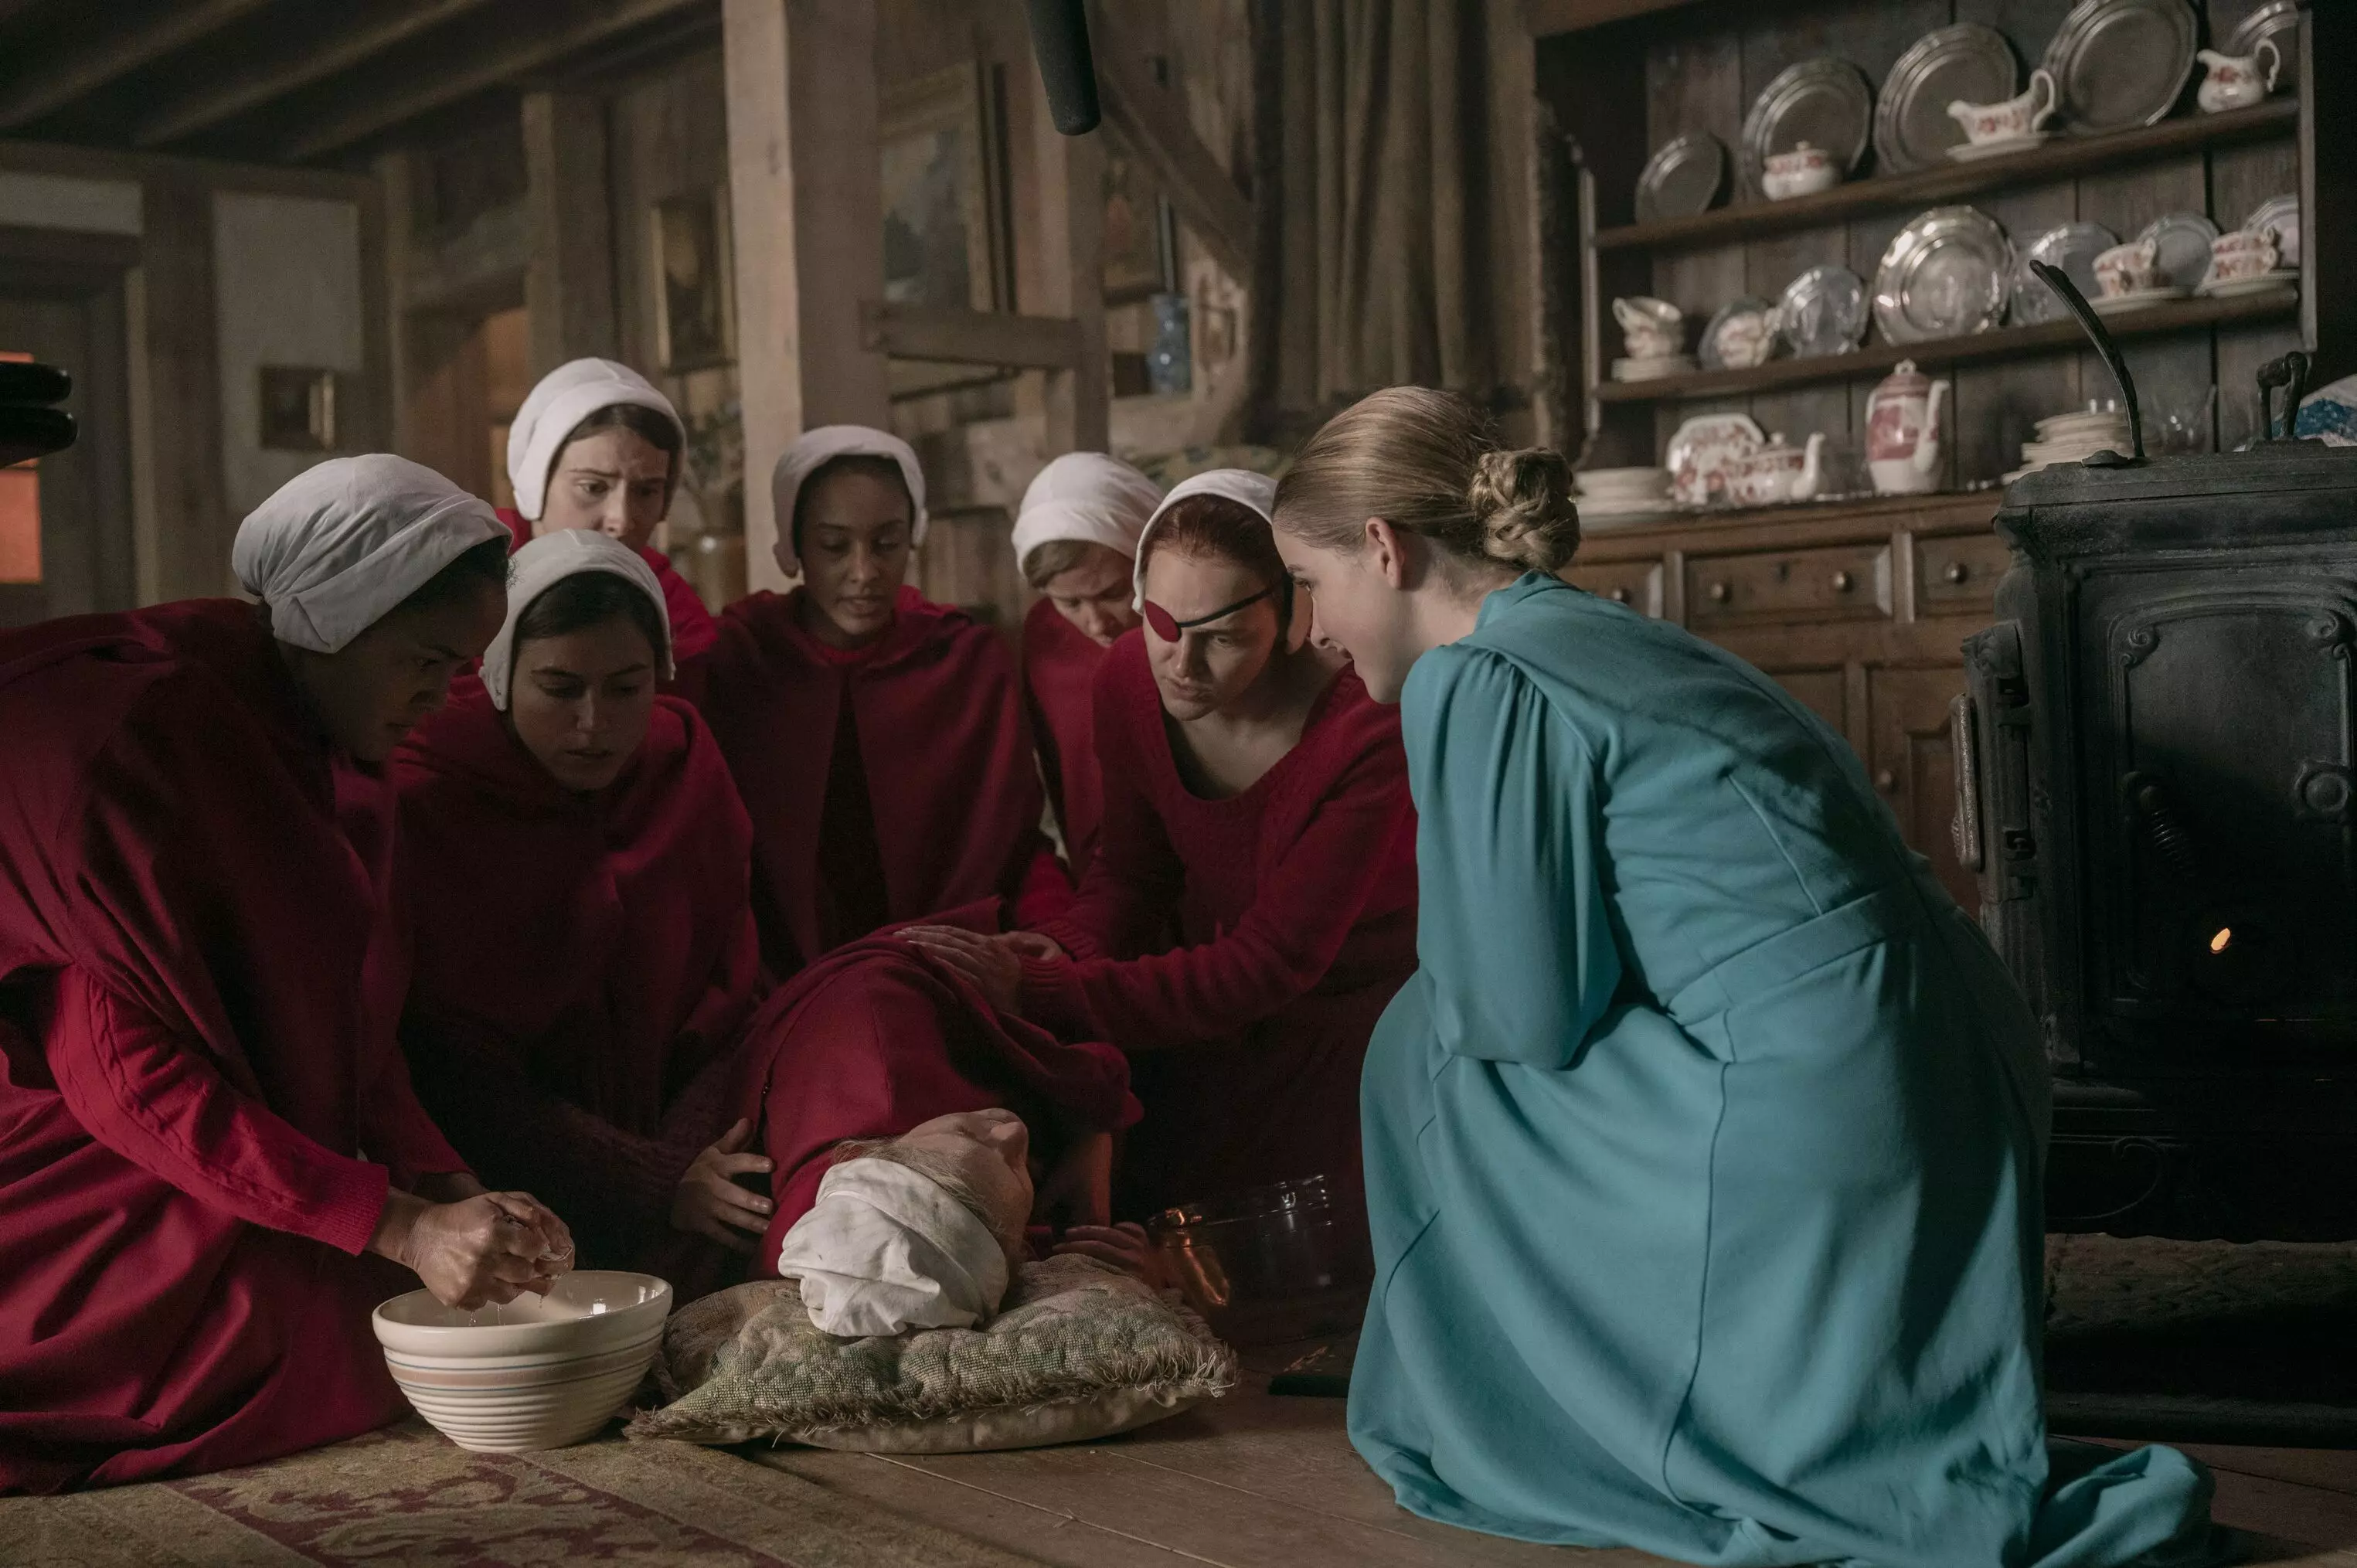 Viewers were upset that some of the handmaids appeared to be killed at the end of the episode (